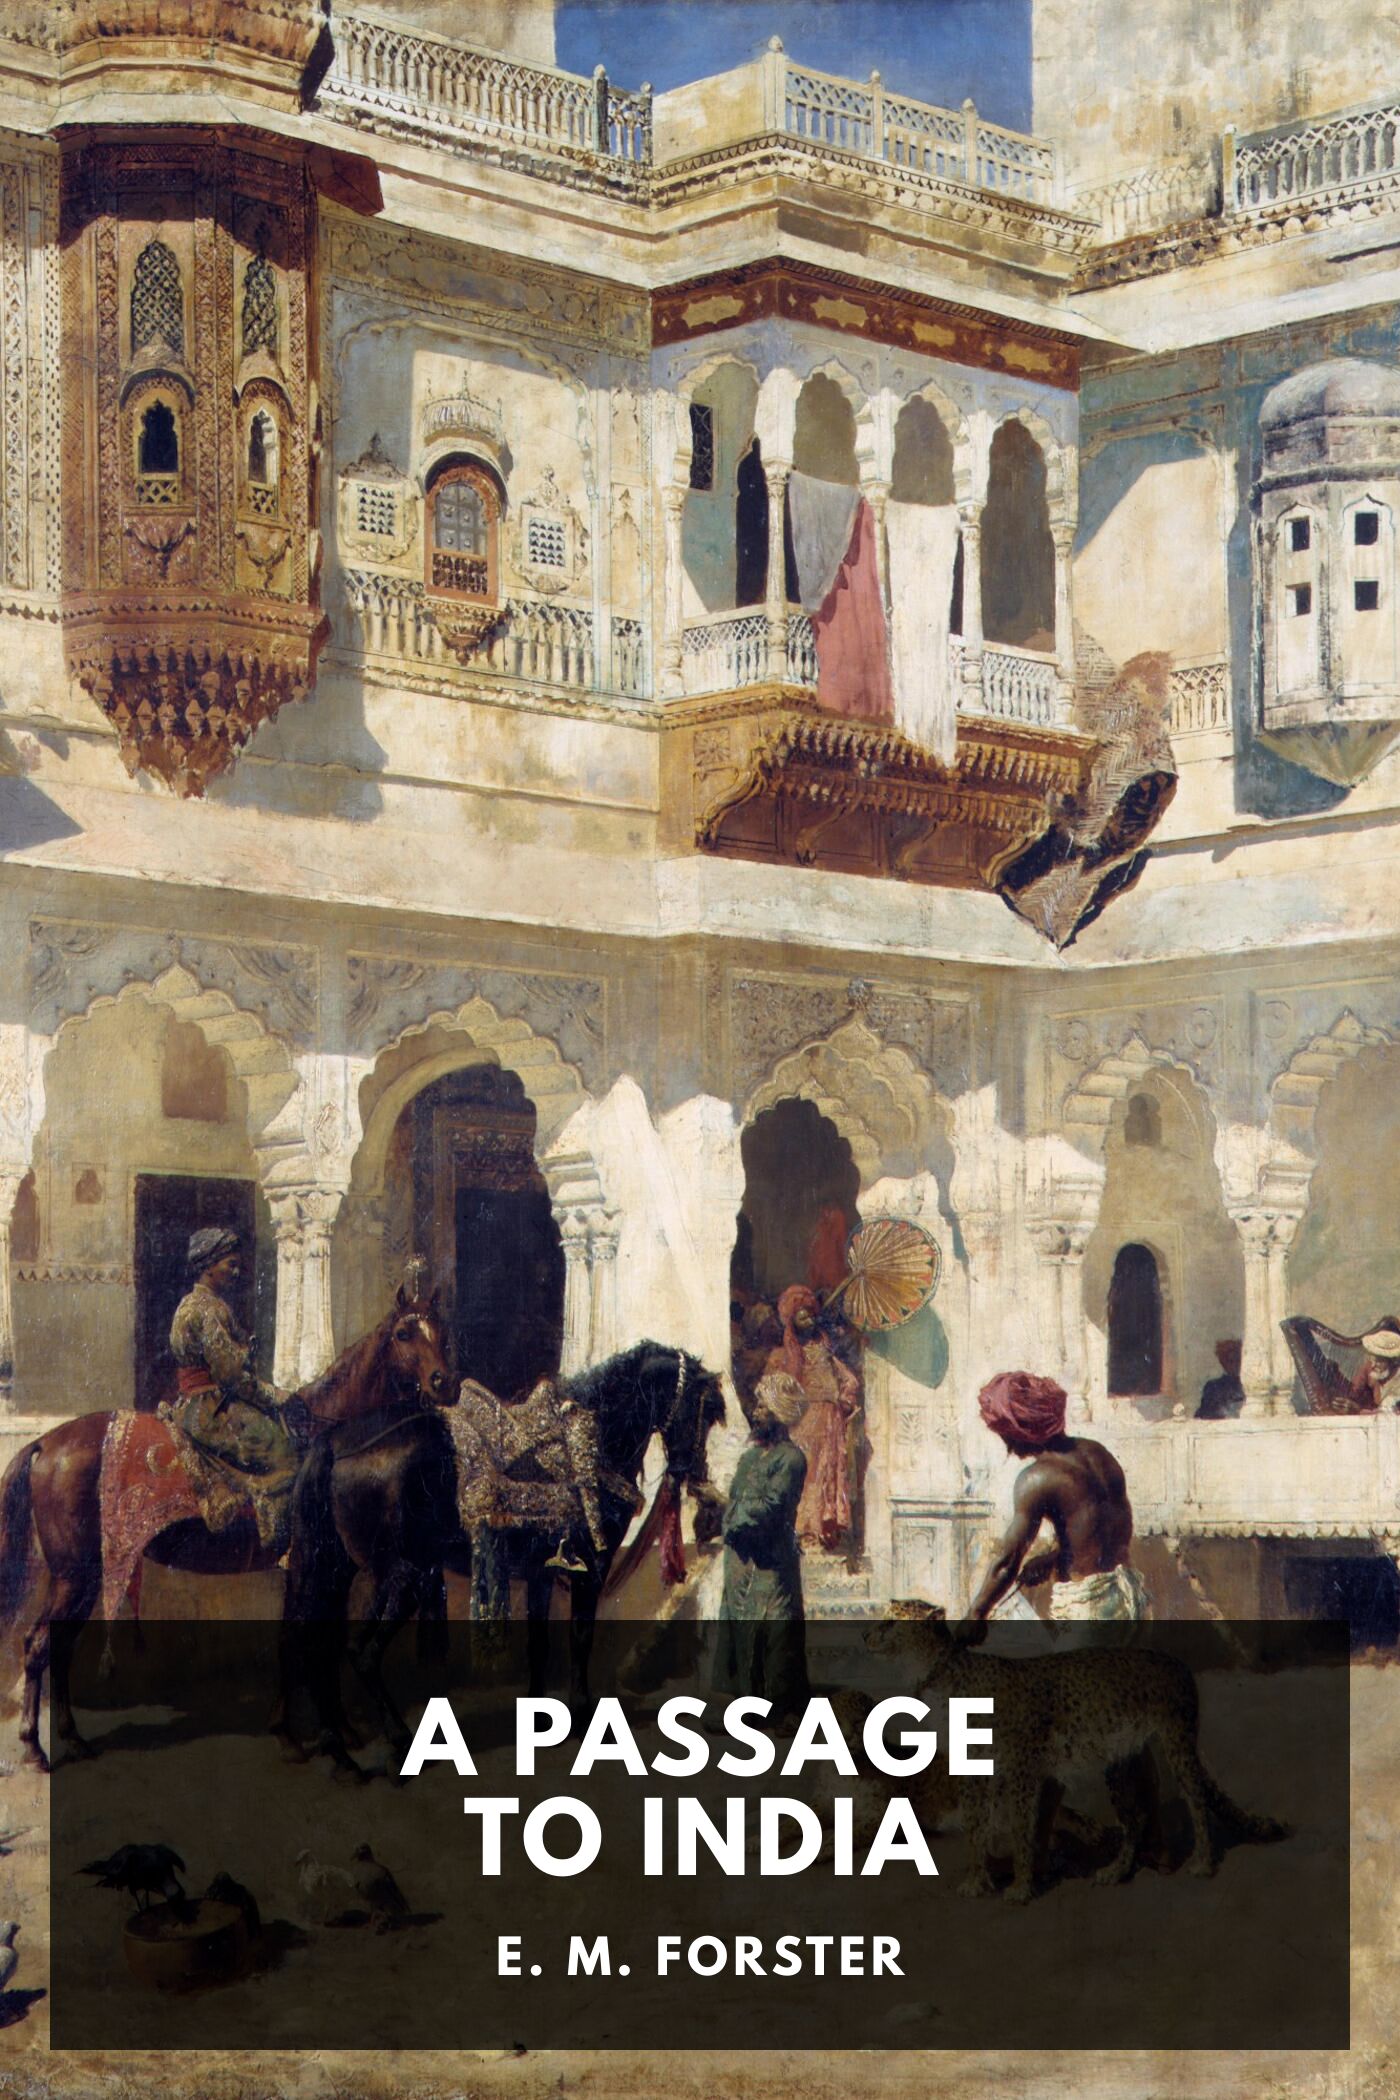 A passage to india by em forster pdf free download apk download from google play